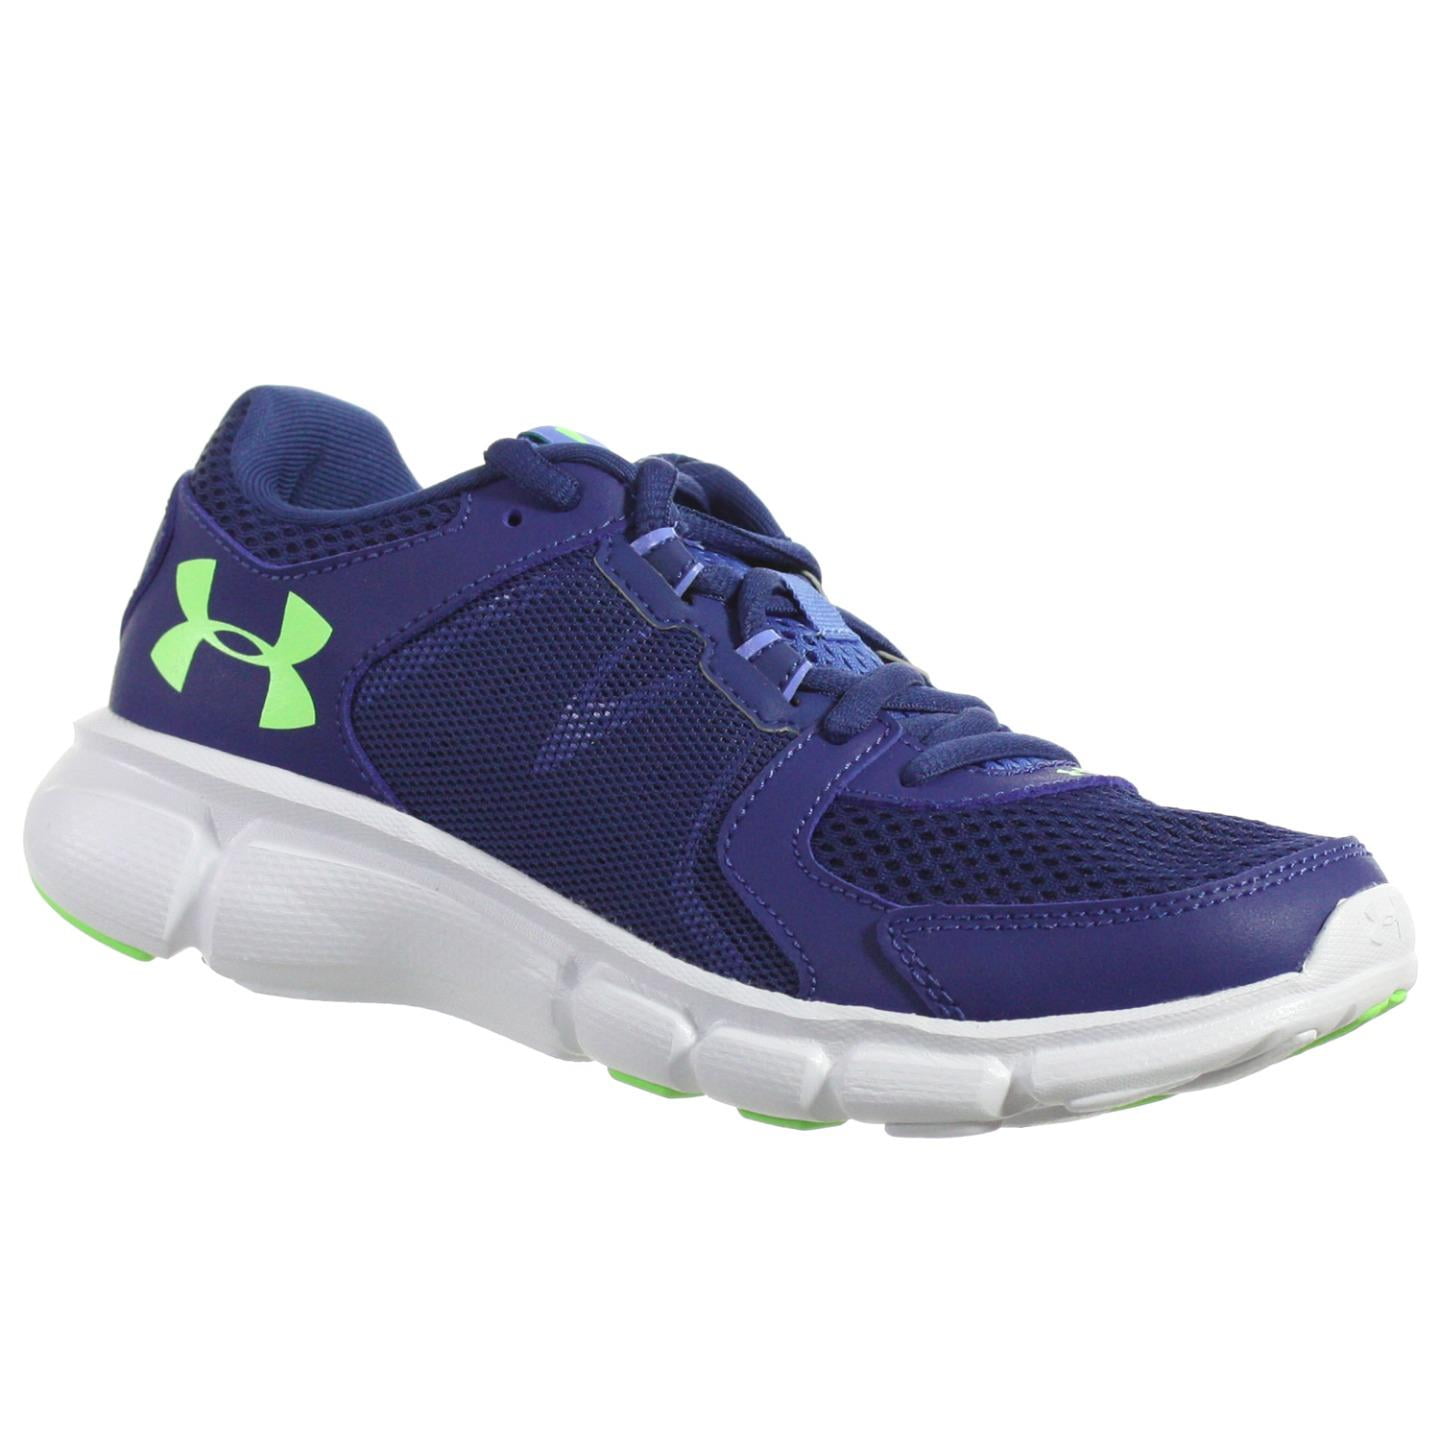 Under Armour - UNDER ARMOUR WOMEN'S ATHLETIC SHOES THRILL 2 ROYAL WHITE ...